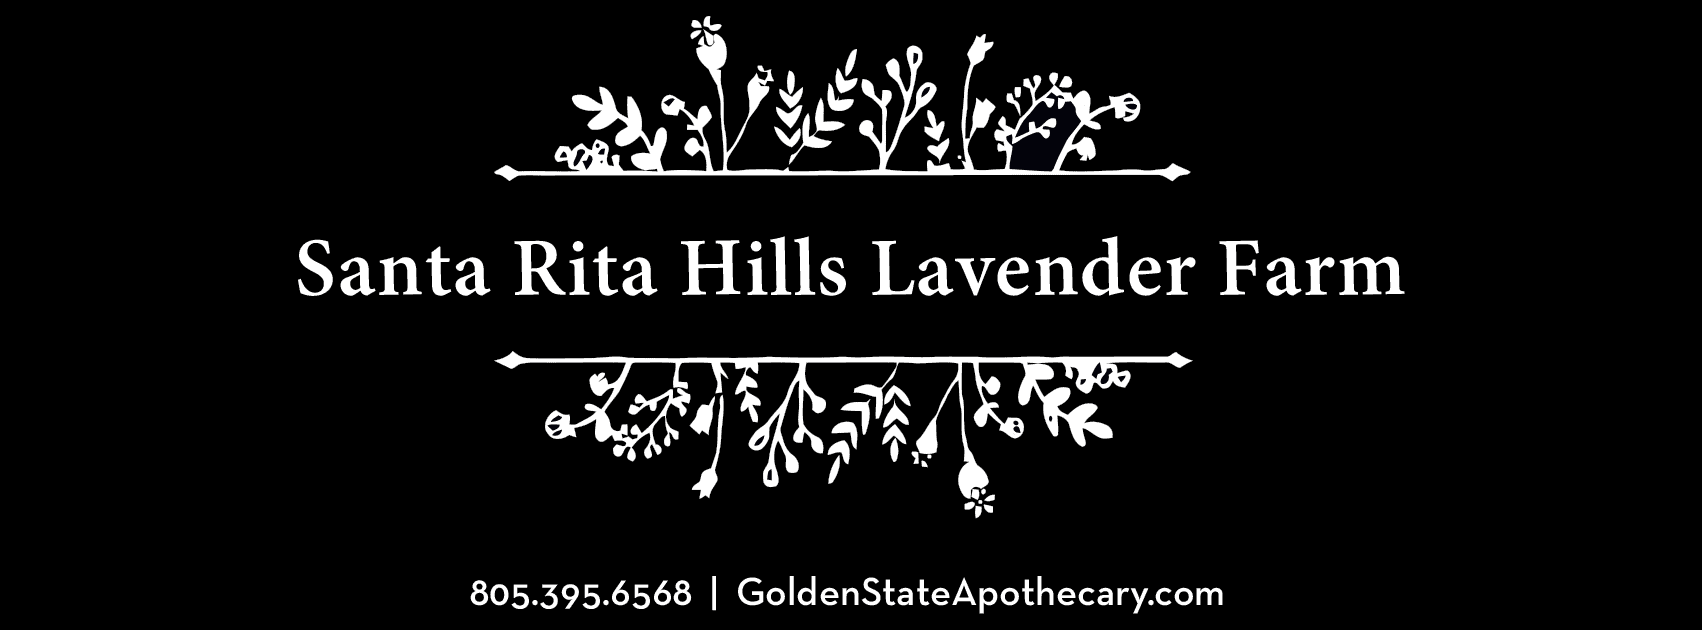 www.goldenstateapothecary.com